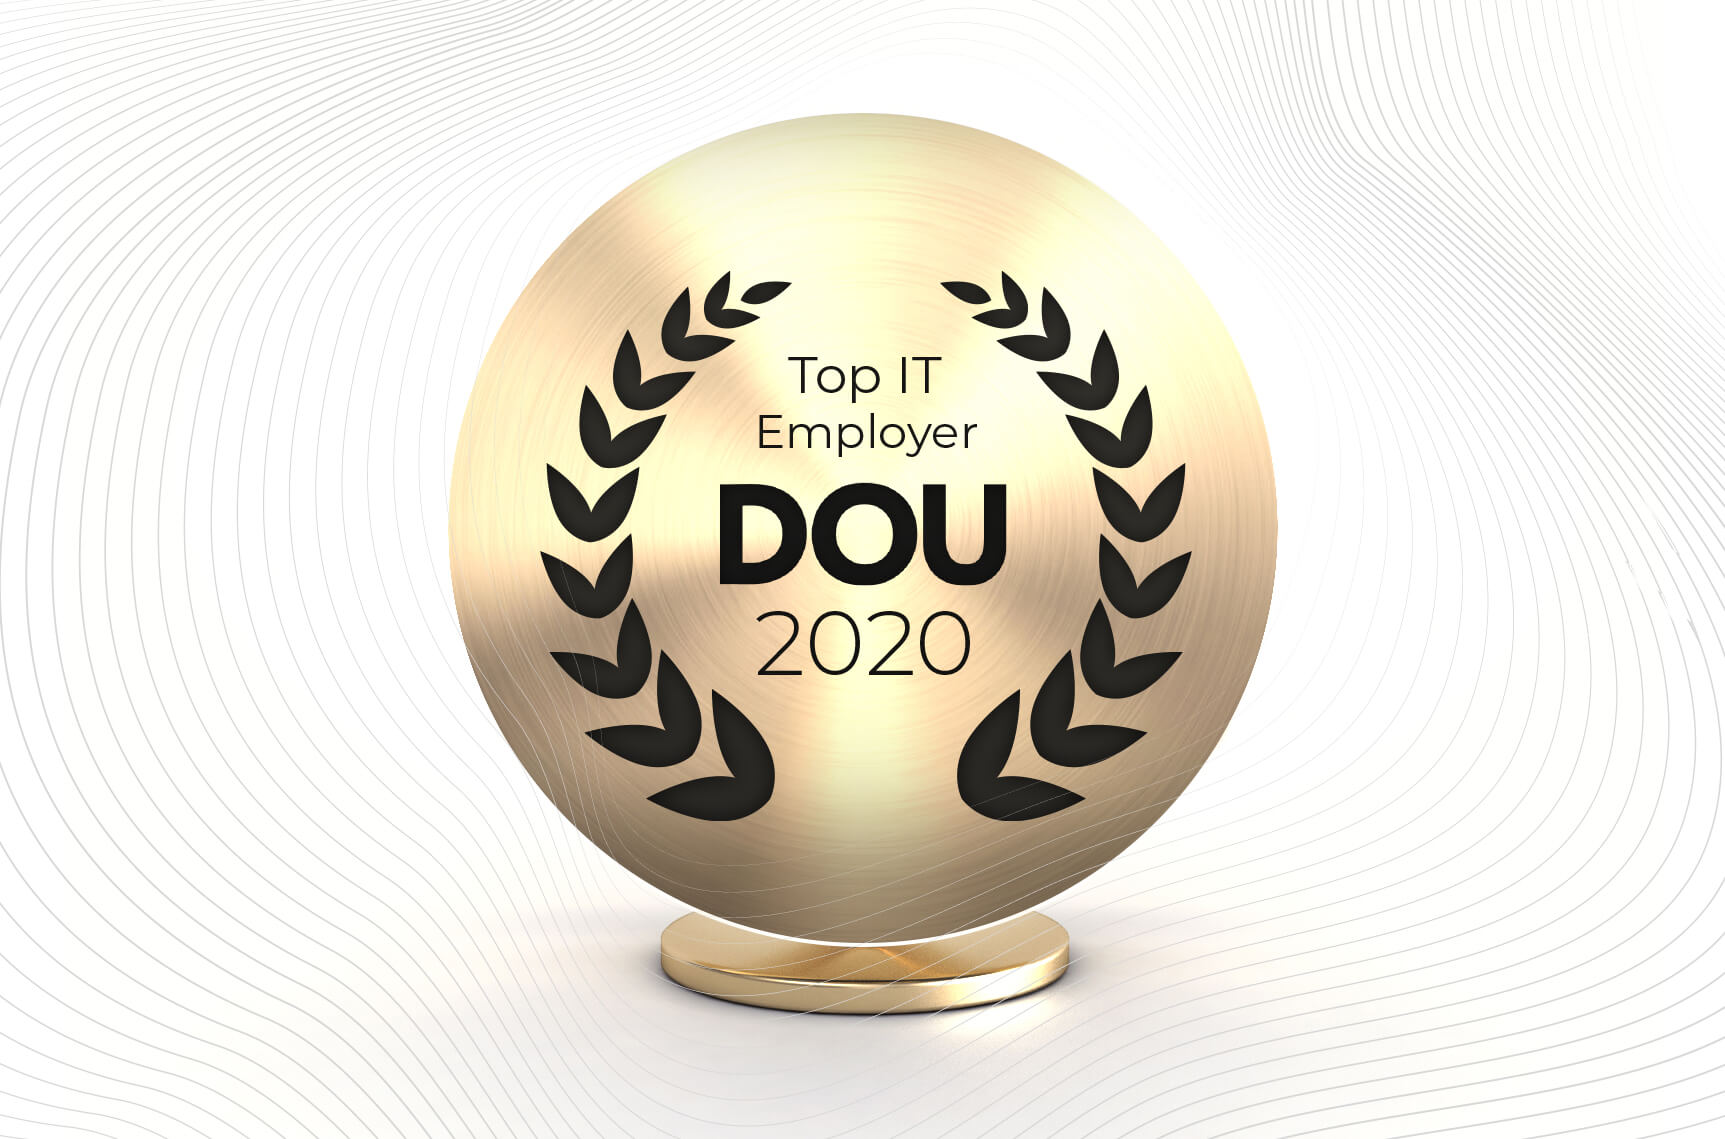 Symphony Solutions rated as Top IT Employer in 2020 by DOU